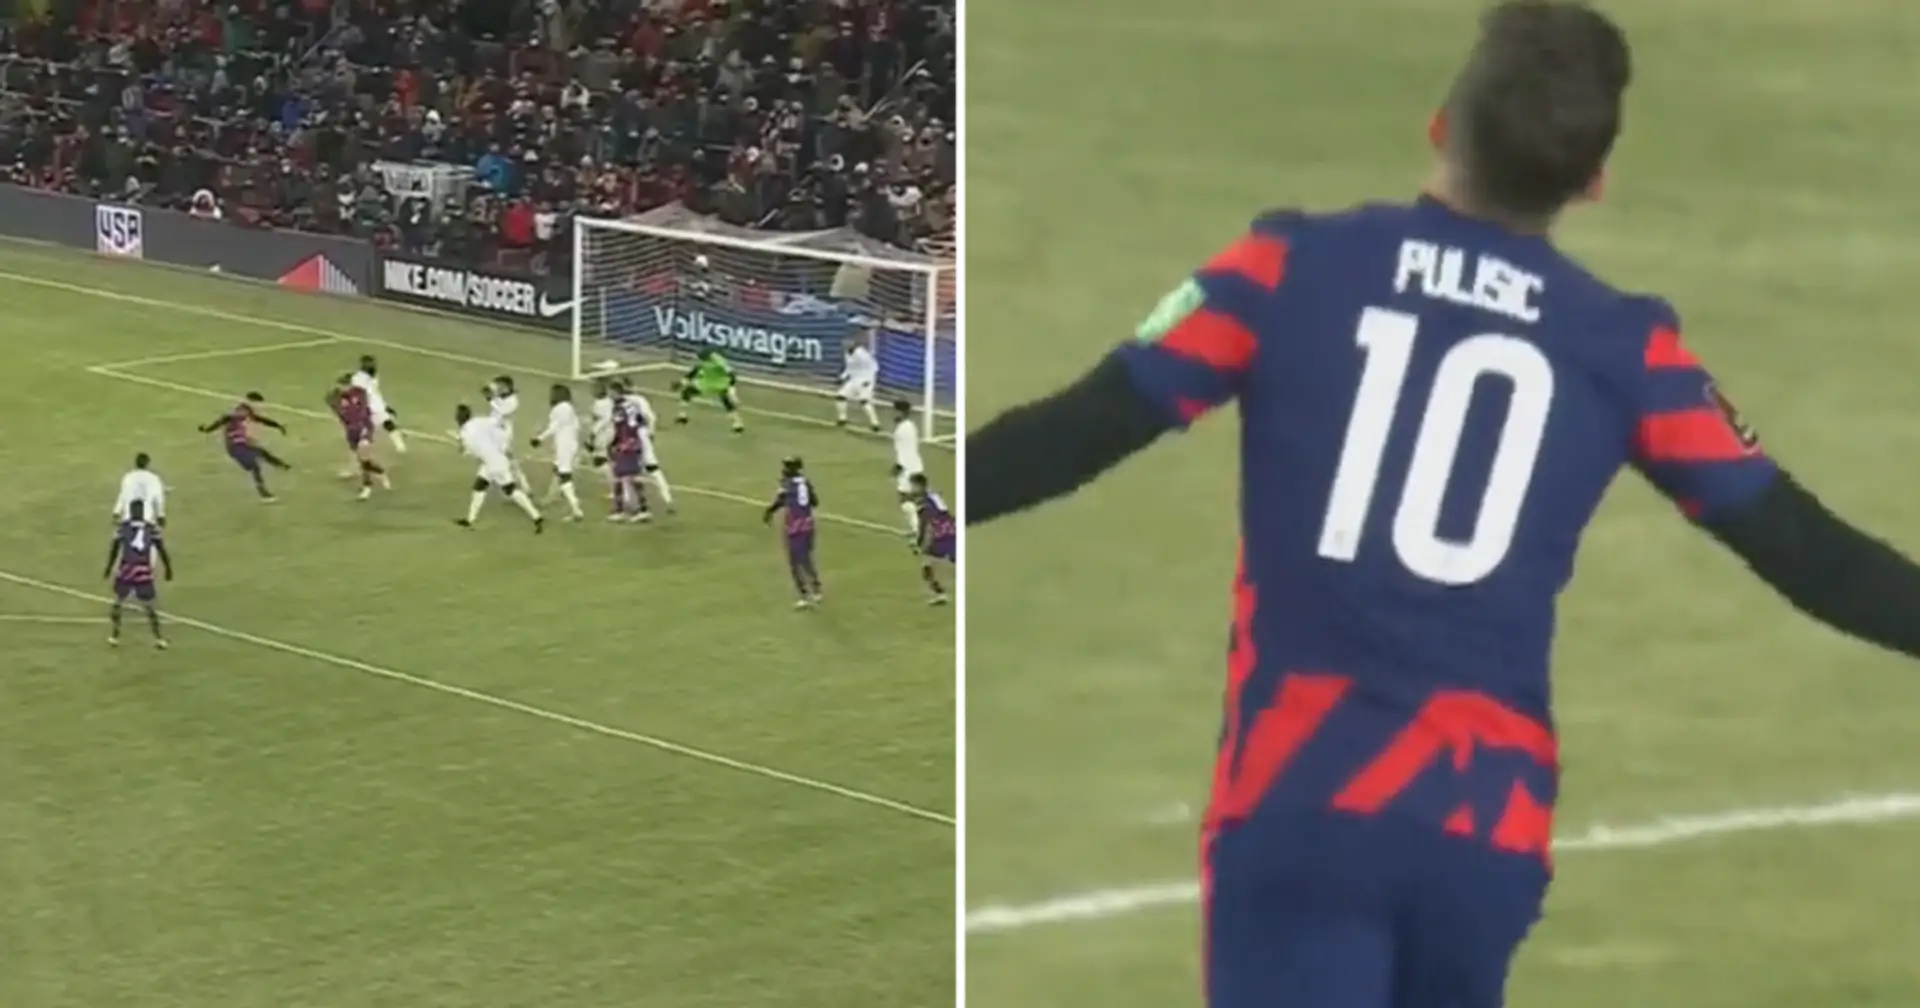 Christian Pulisic comes on as sub and scores as USA defeat Honduras in freezing cold